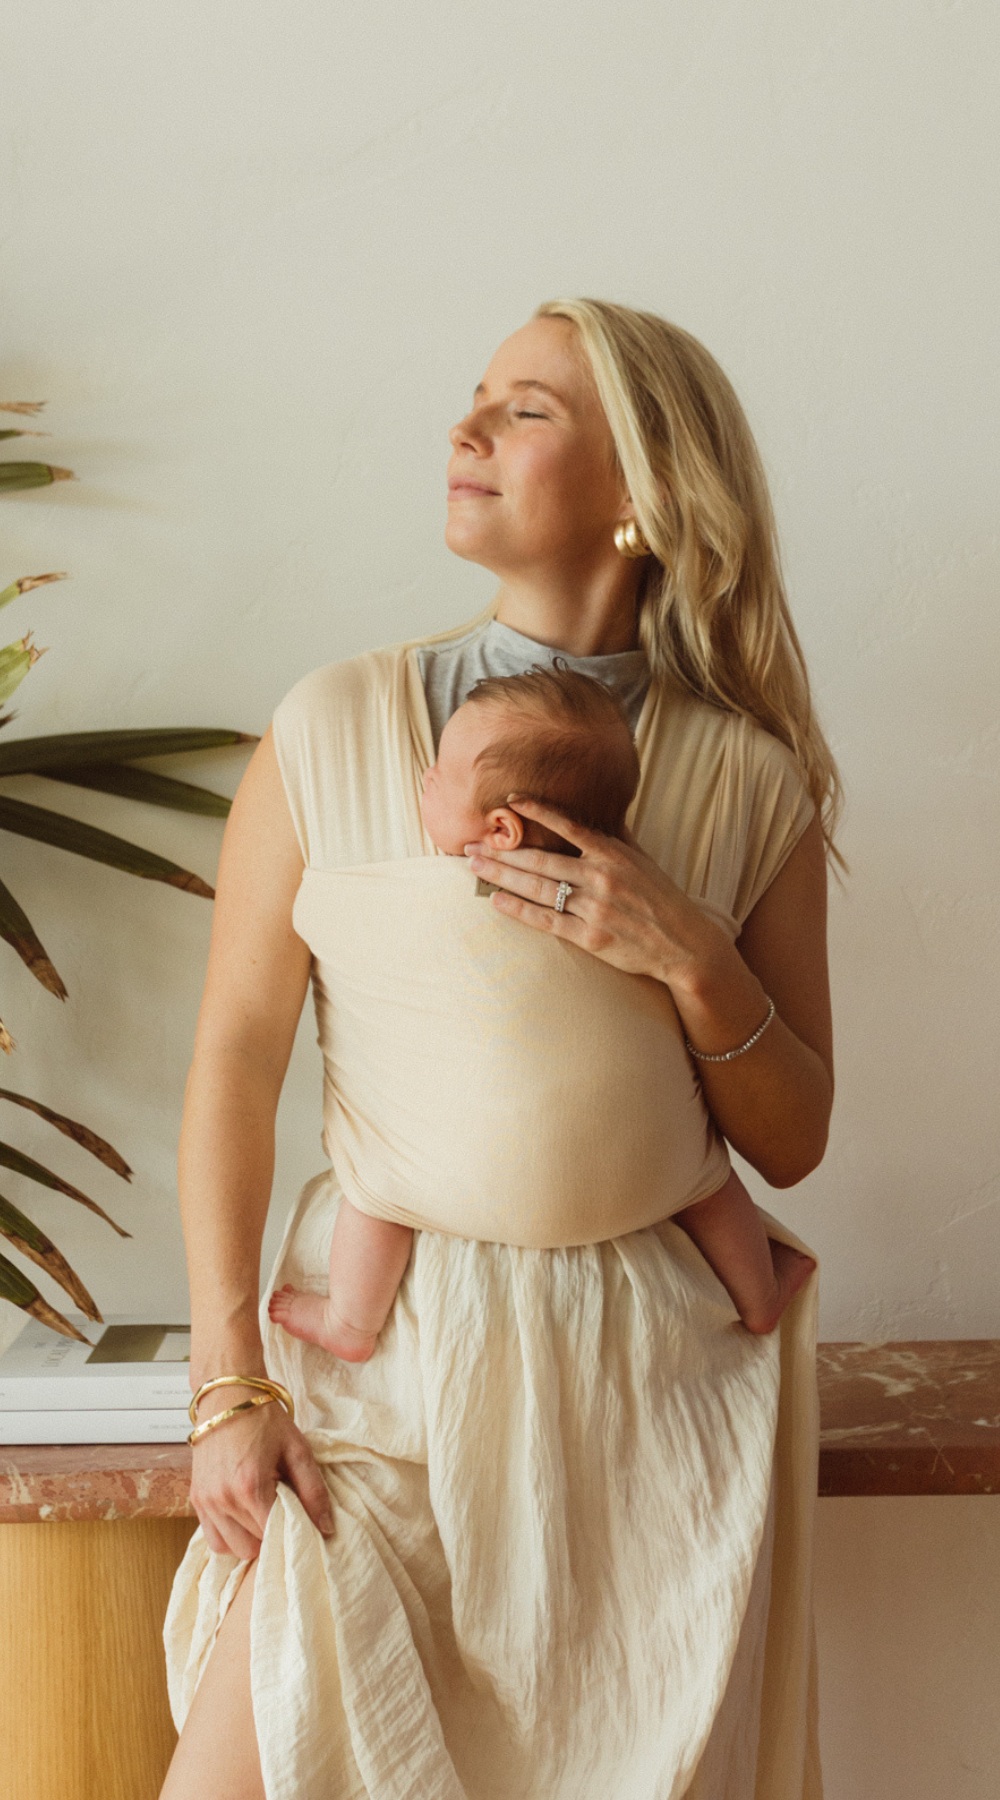 chekoh baby werap carrier for newborn in dune colour perfect sandy beige neutral 